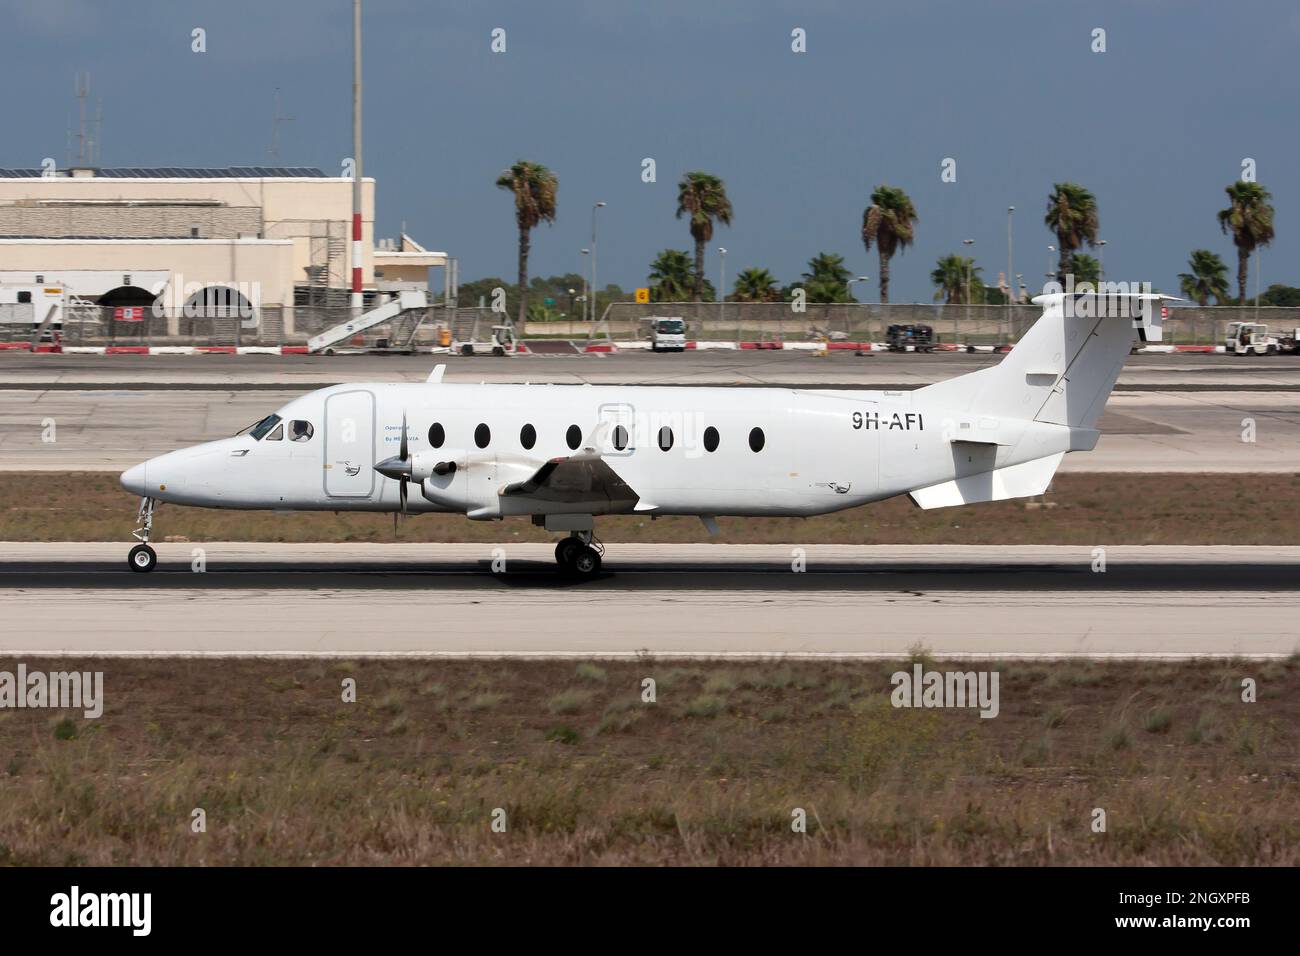 A MedAvia Beechcraft 1900D on the runway at Malta international airport. Mediterranean Aviation Company Limited, (Medavia), is an Aviation Service Provider with its head office and base of operations in Malta. Stock Photo